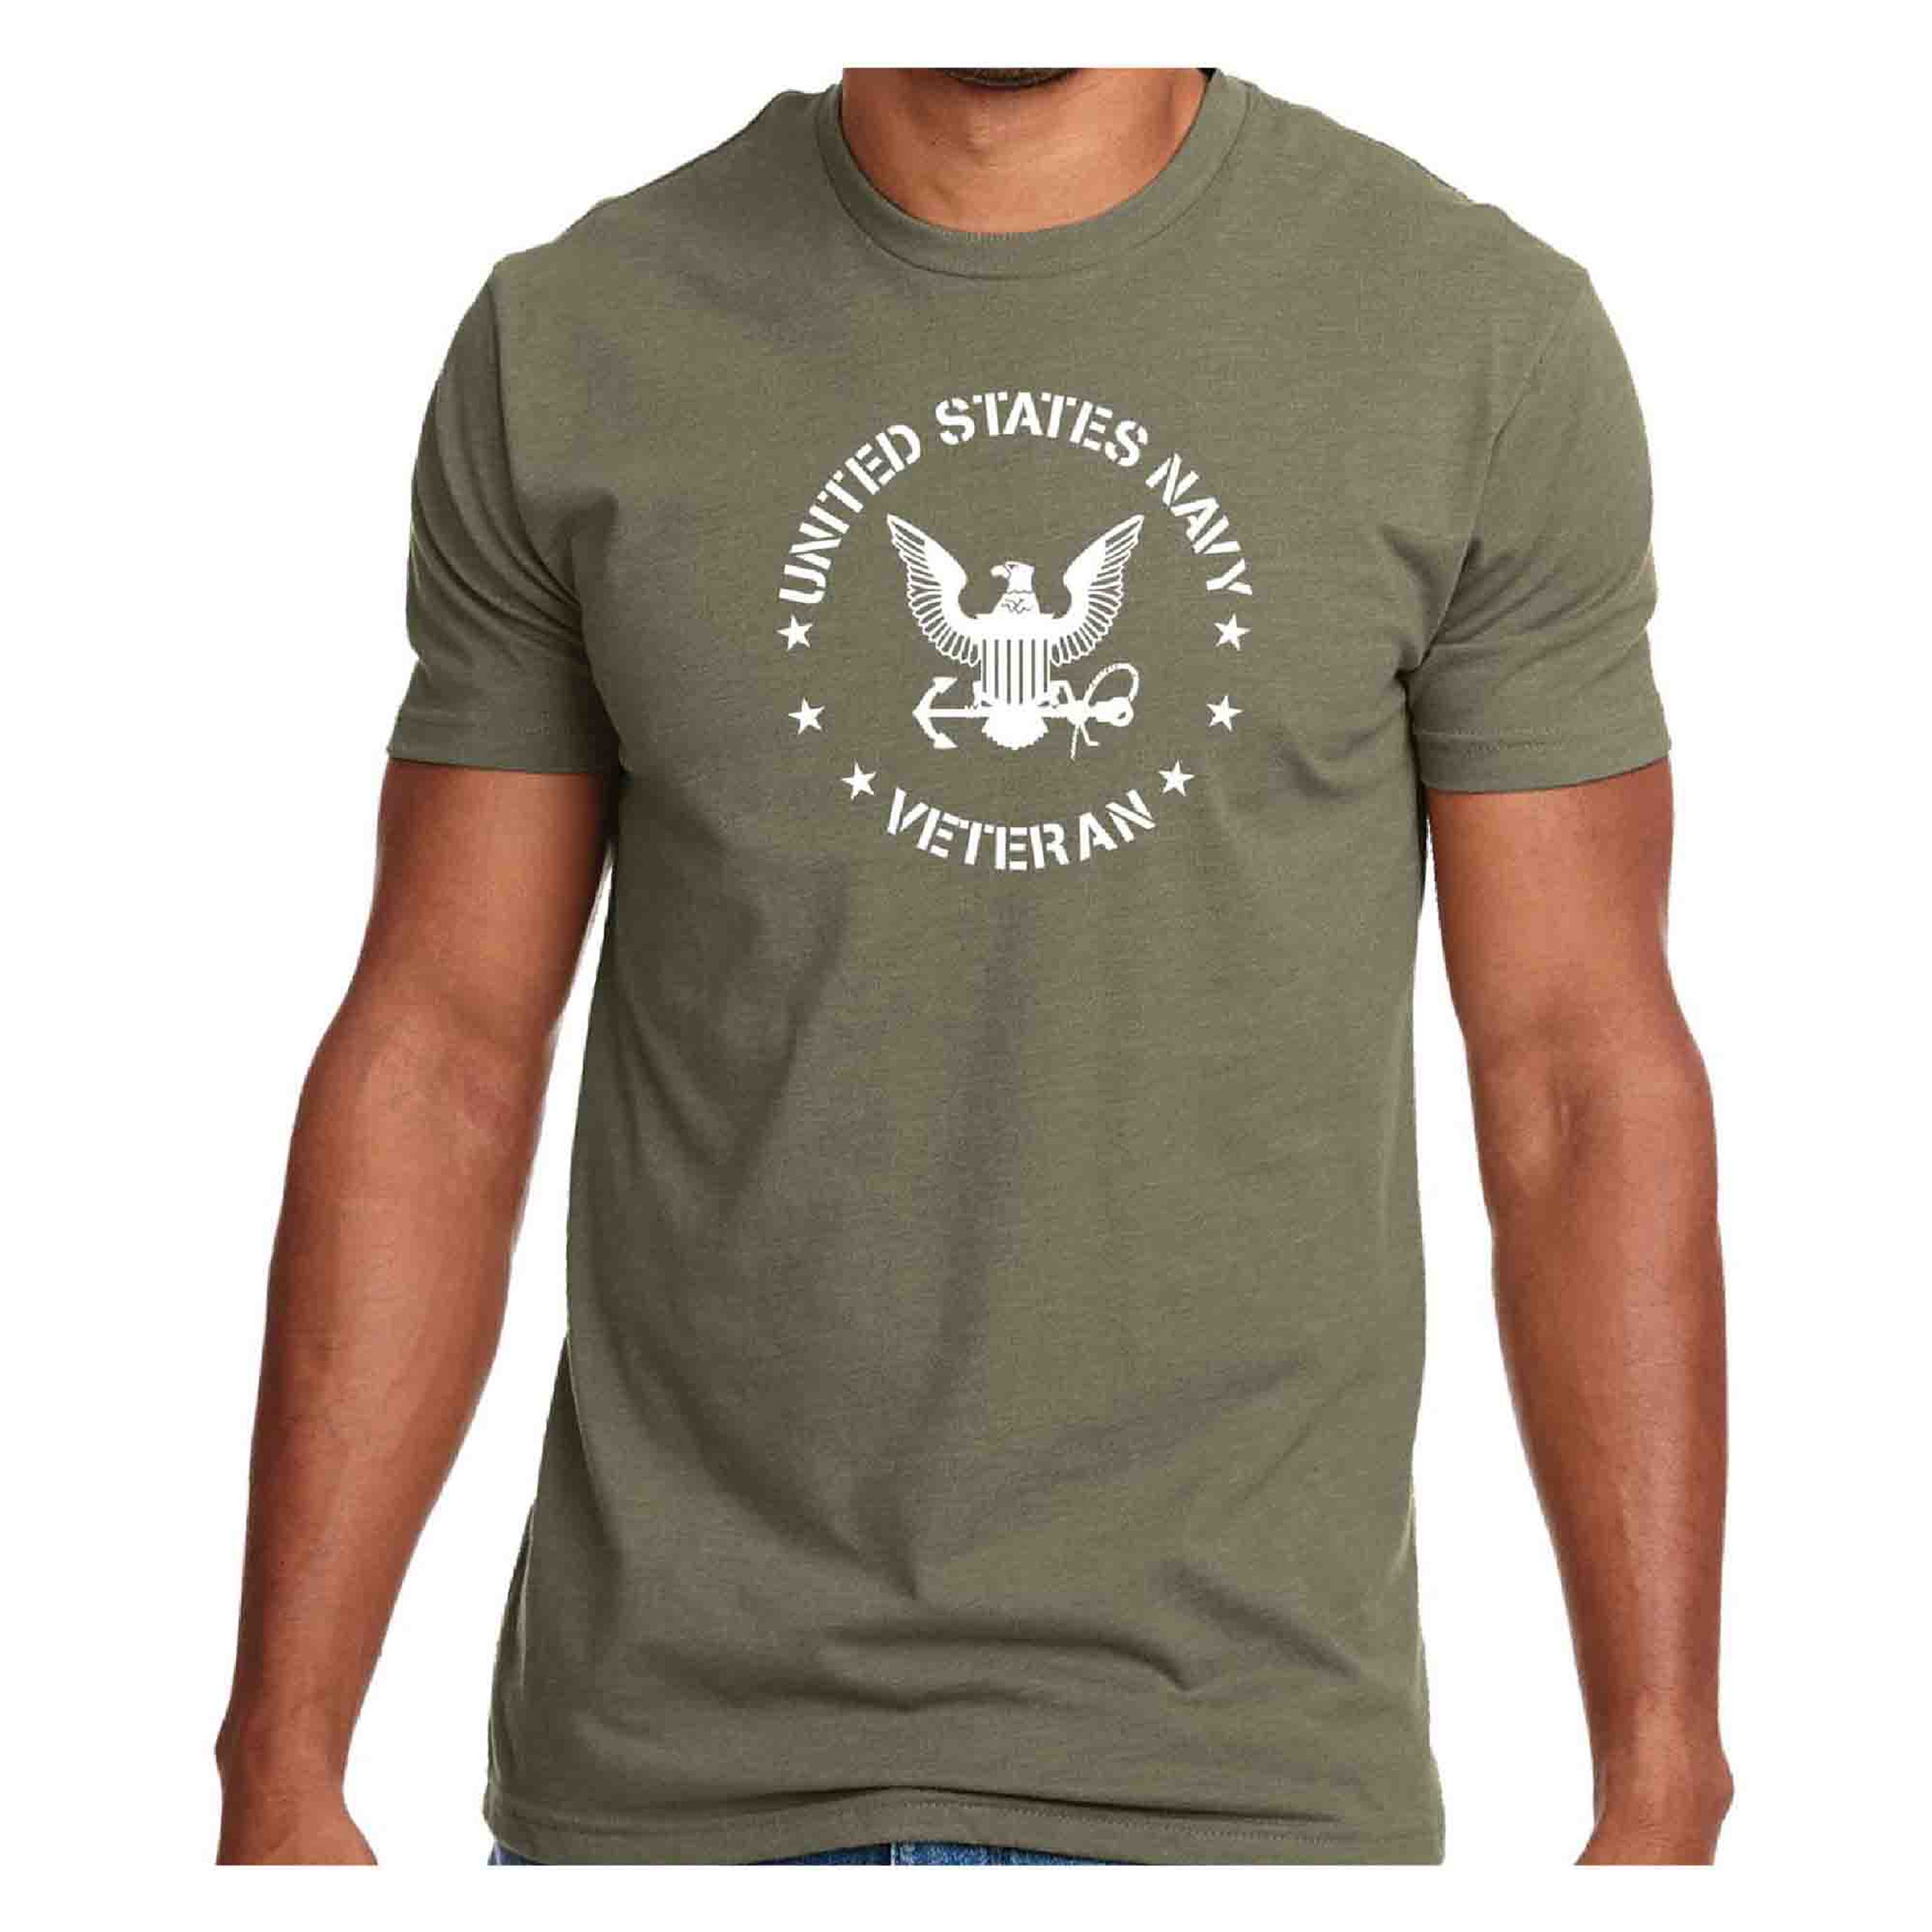 Officially Licensed US Navy Veteran T-Shirt with Eagle Emblem